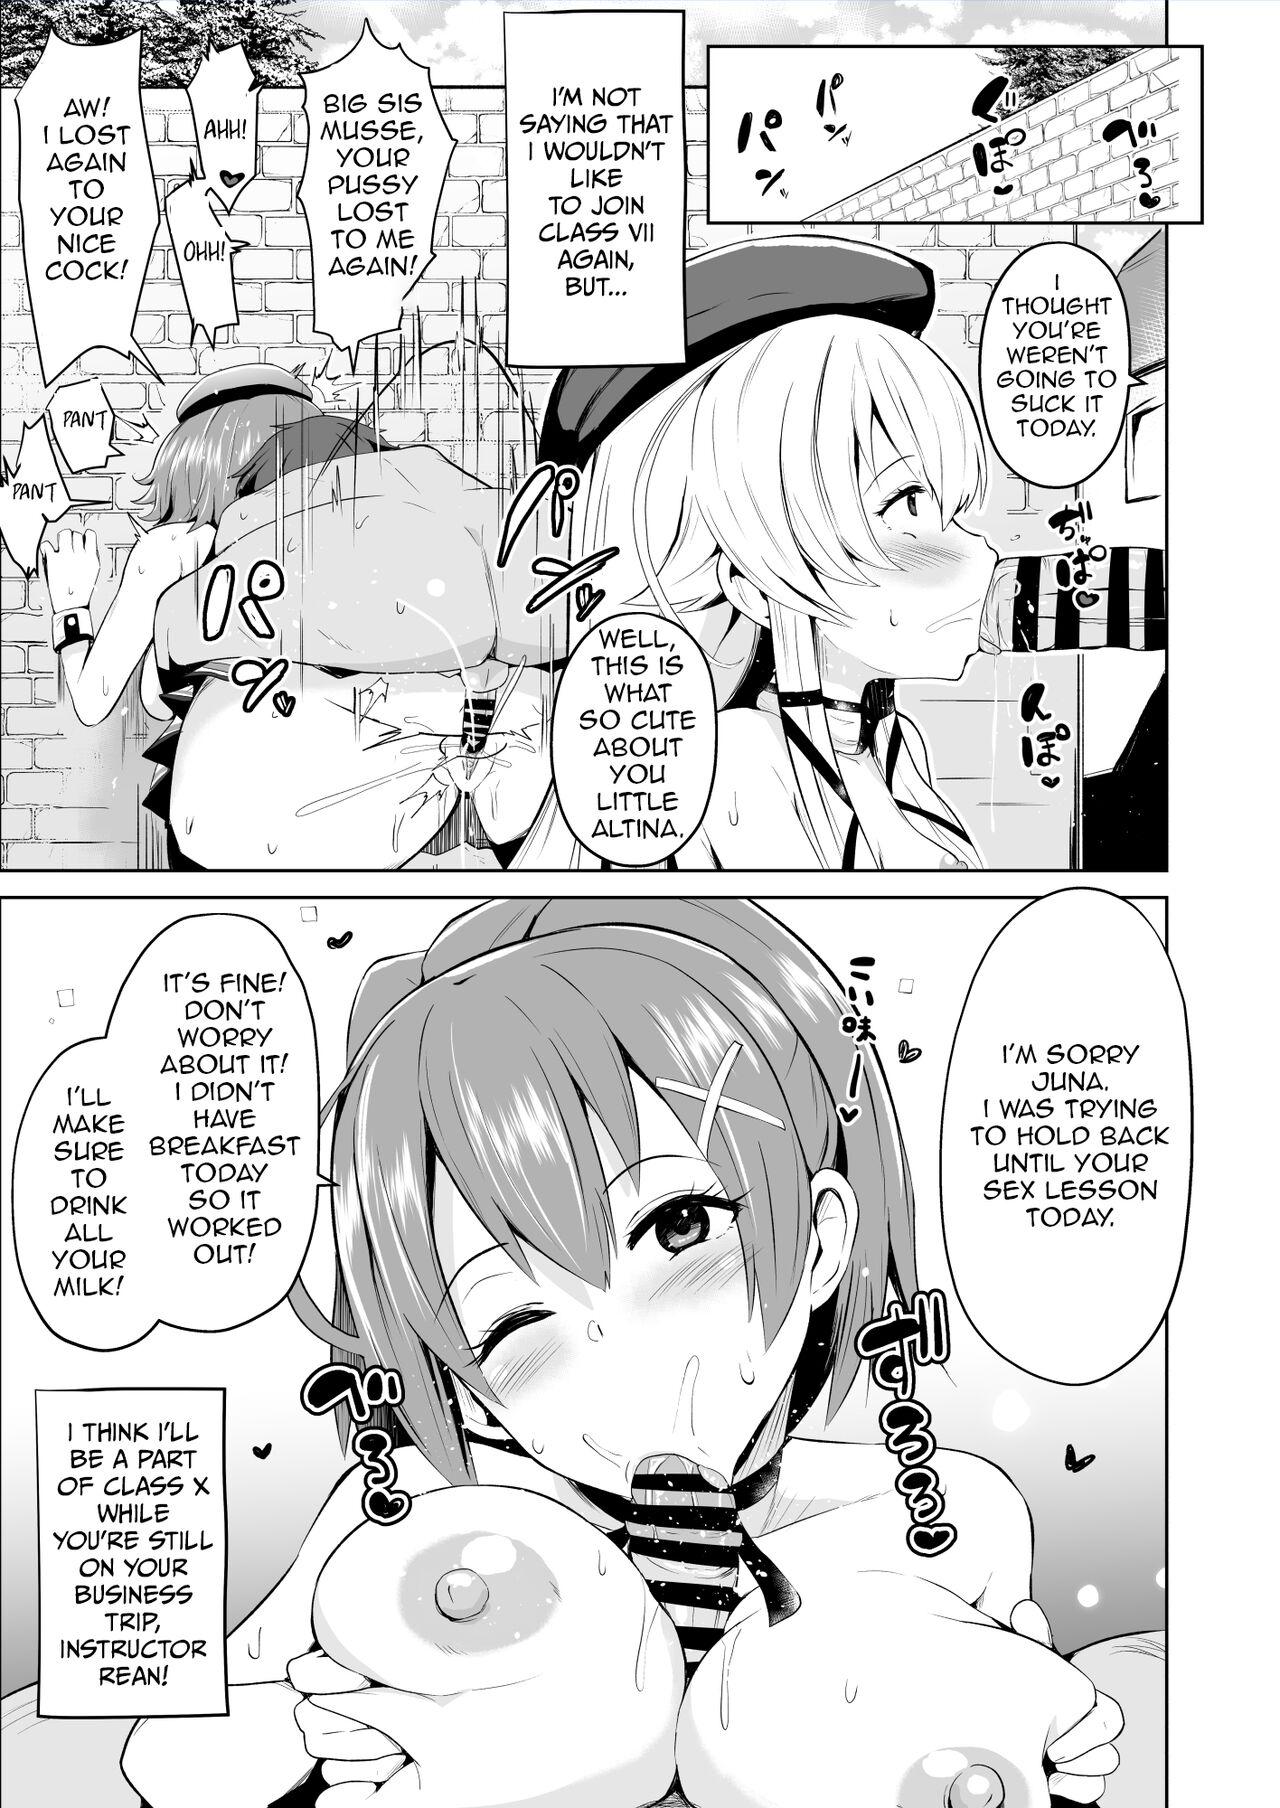 Amigos Hypnosis of the New Class VII - Juna's Report - The legend of heroes | eiyuu densetsu Amateur - Page 7